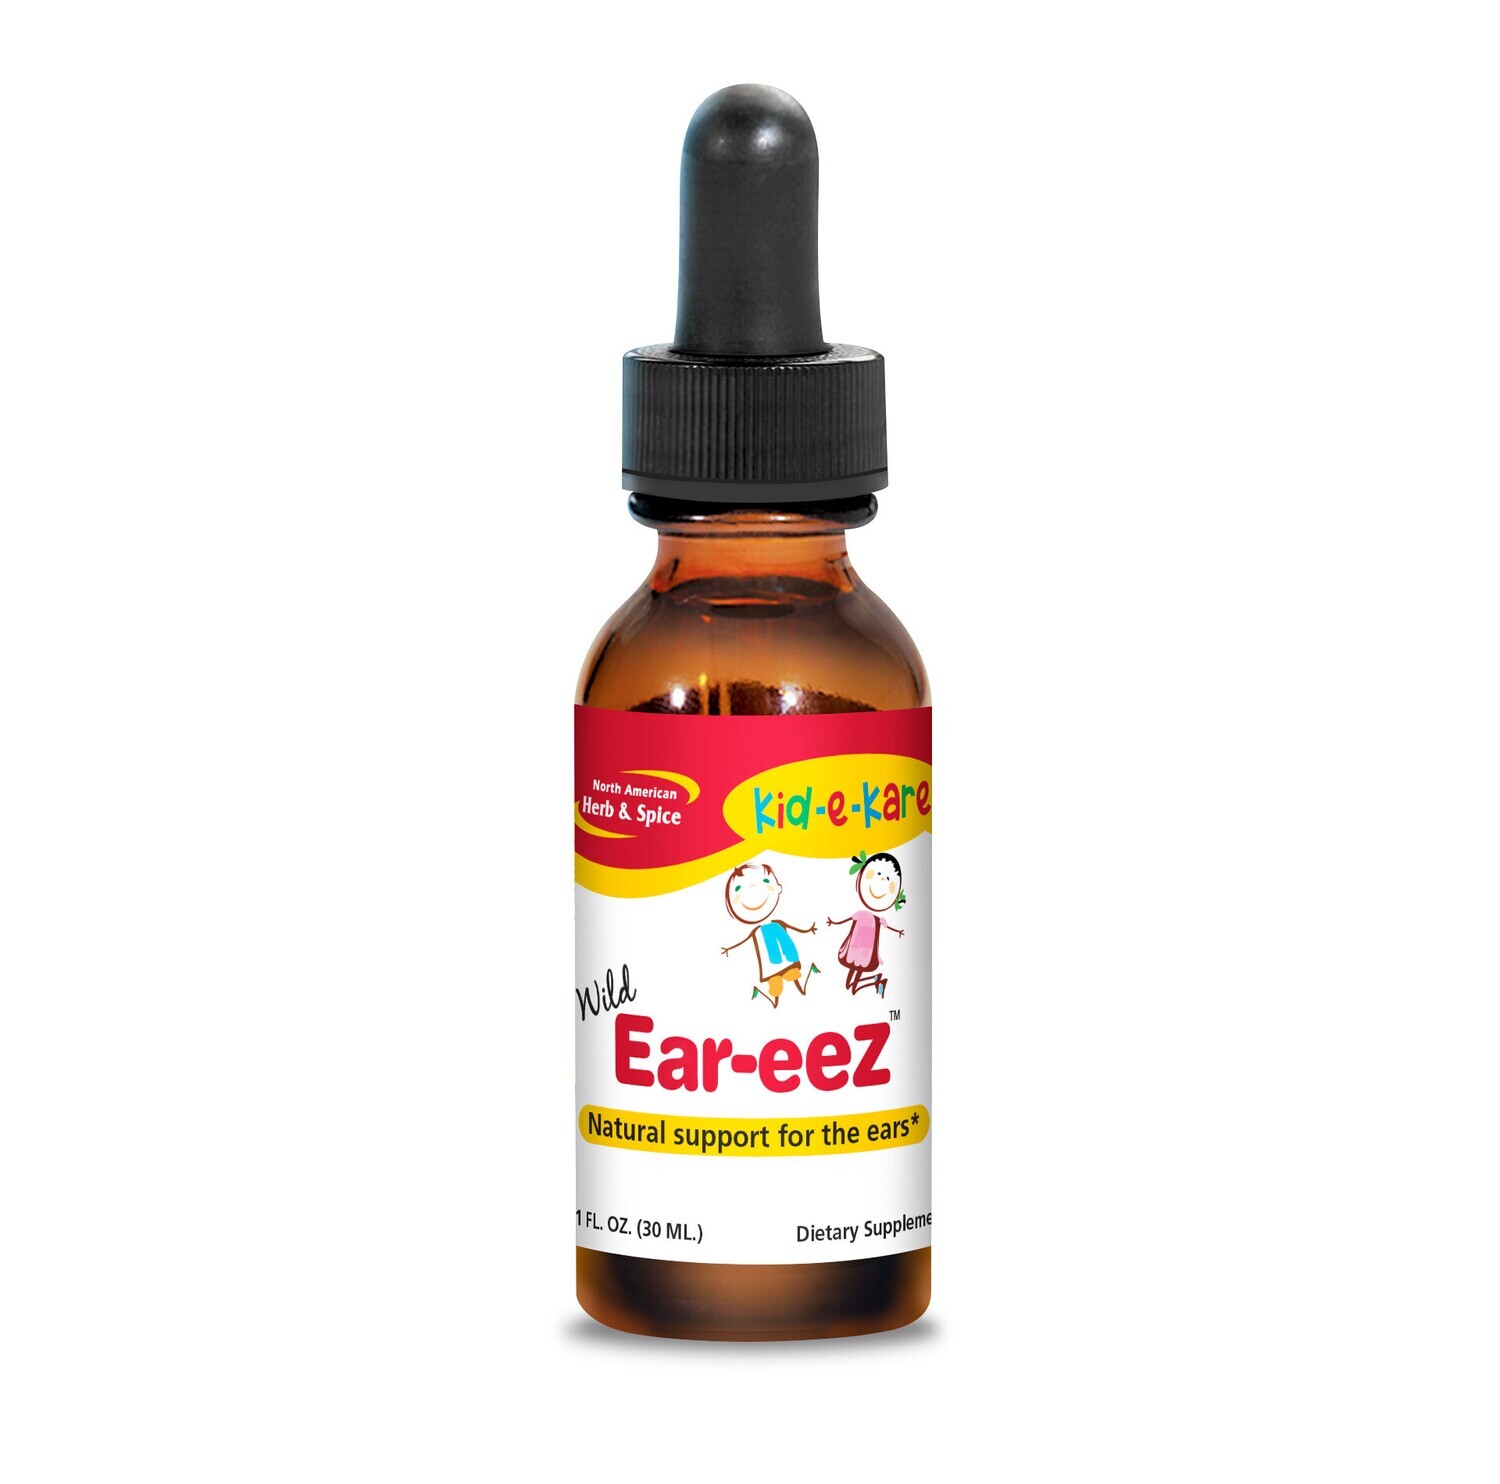 North American Herb &amp; Spice, kid-e-kare, Wild Ear-eez, Natural Support for the ears, Liquid Oil Drops - 1 fl oz (30 mL)